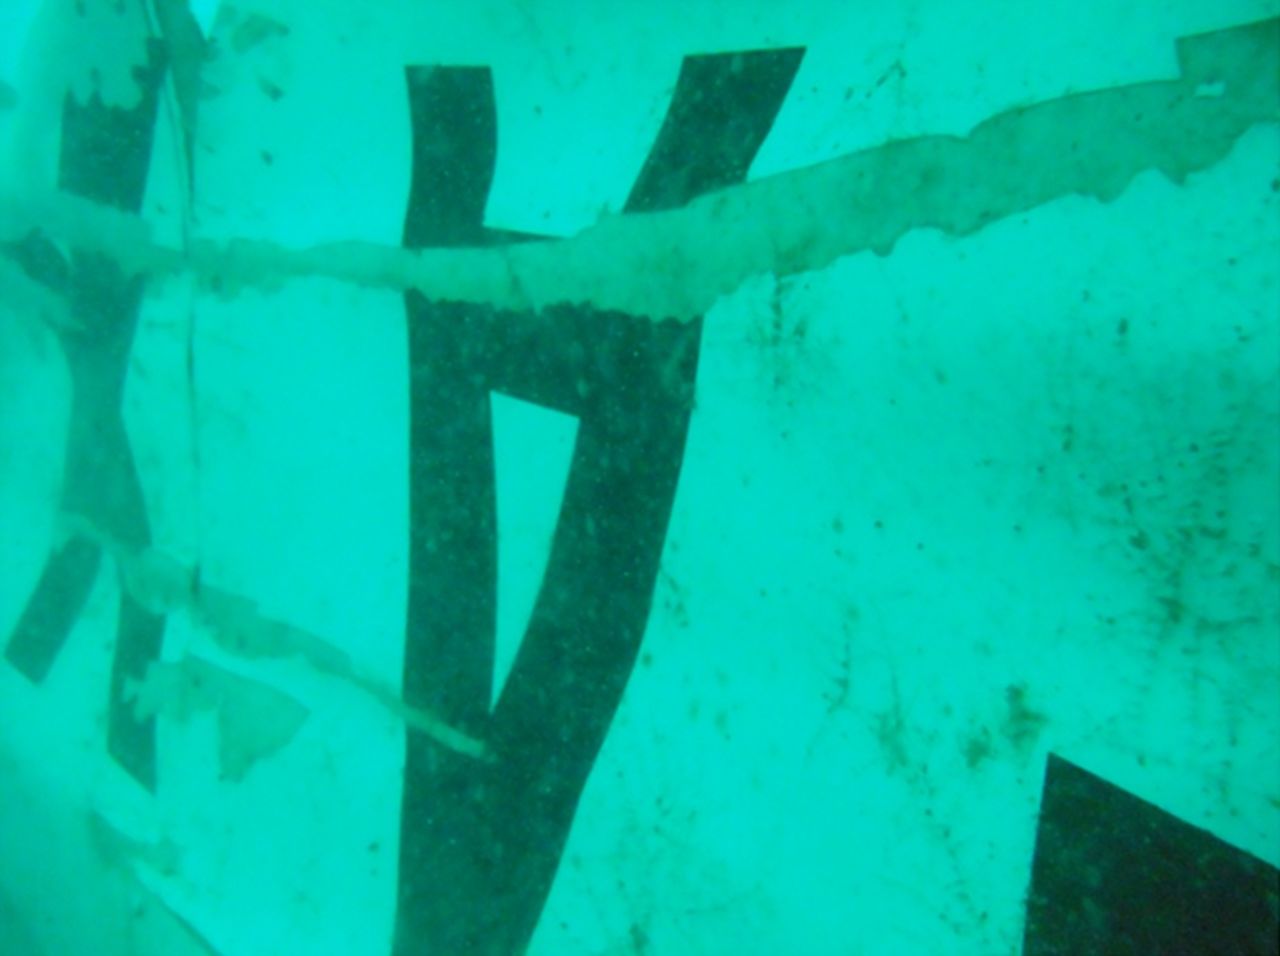 Writing could be made out, showing the AirAsia insignia and other identifying features. The find is important because the plane's flight recorders were located in the tail section.